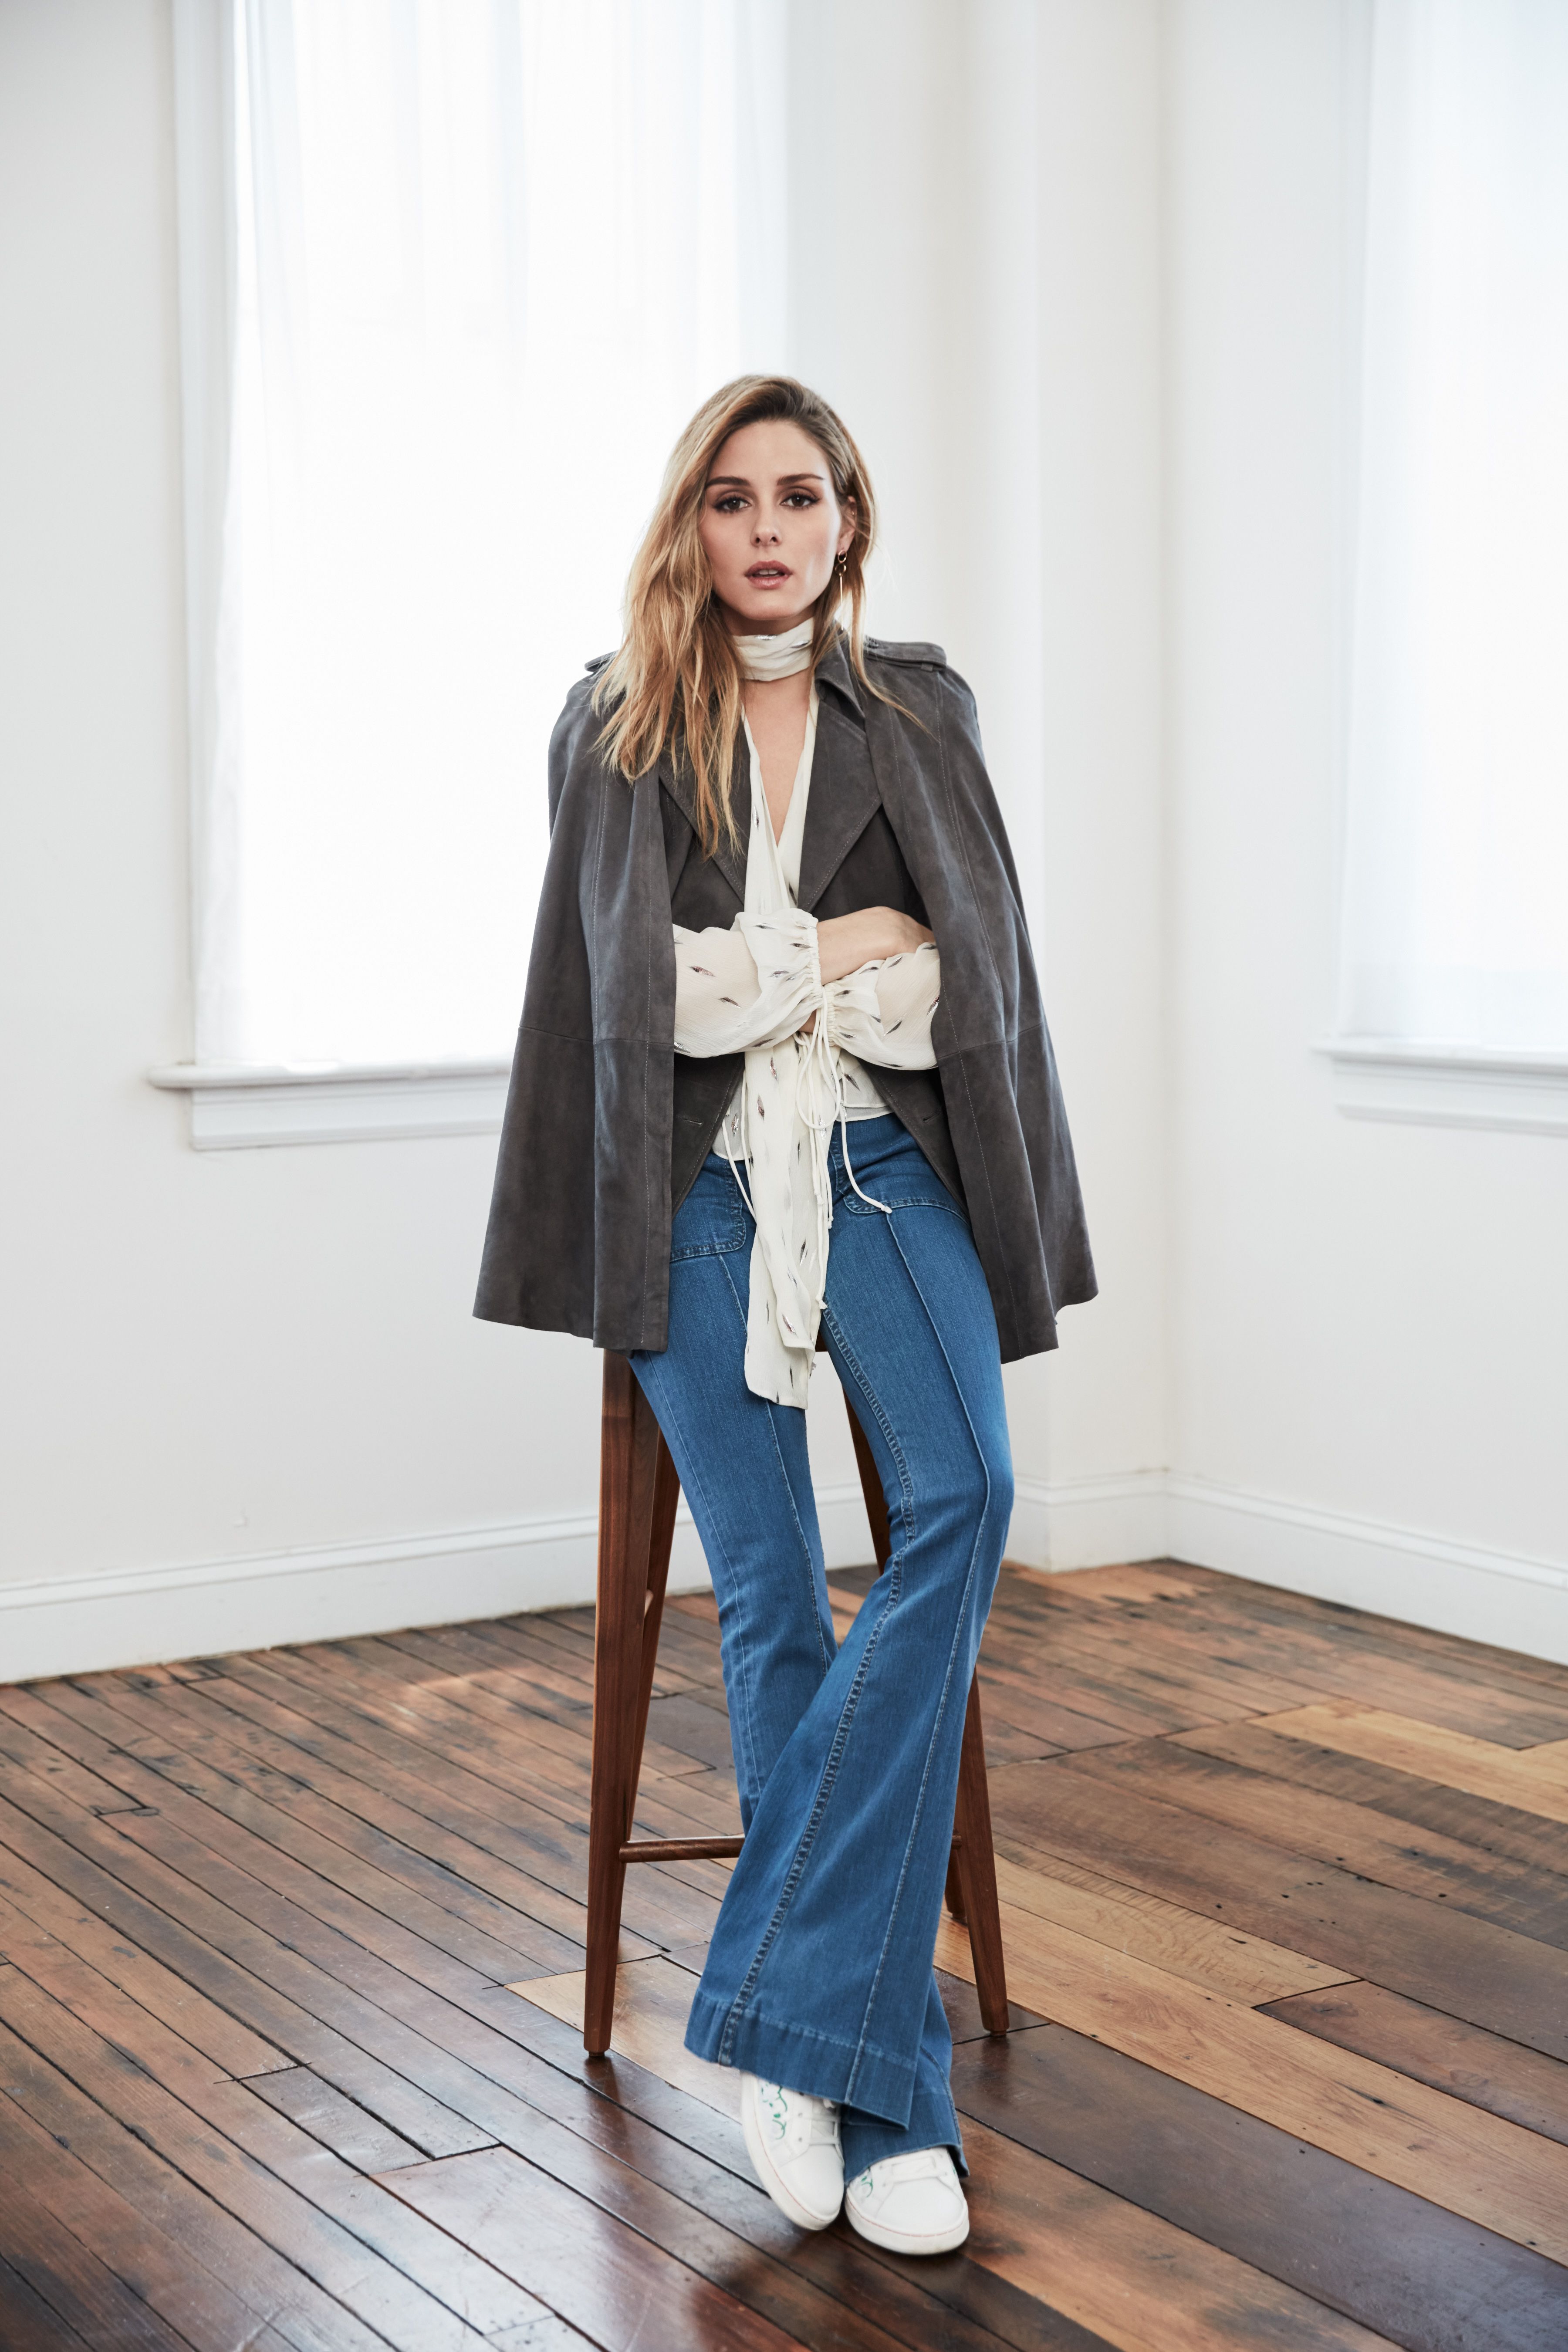 Olivia Palermo + Chelsea28 for Nordstrom cape trench